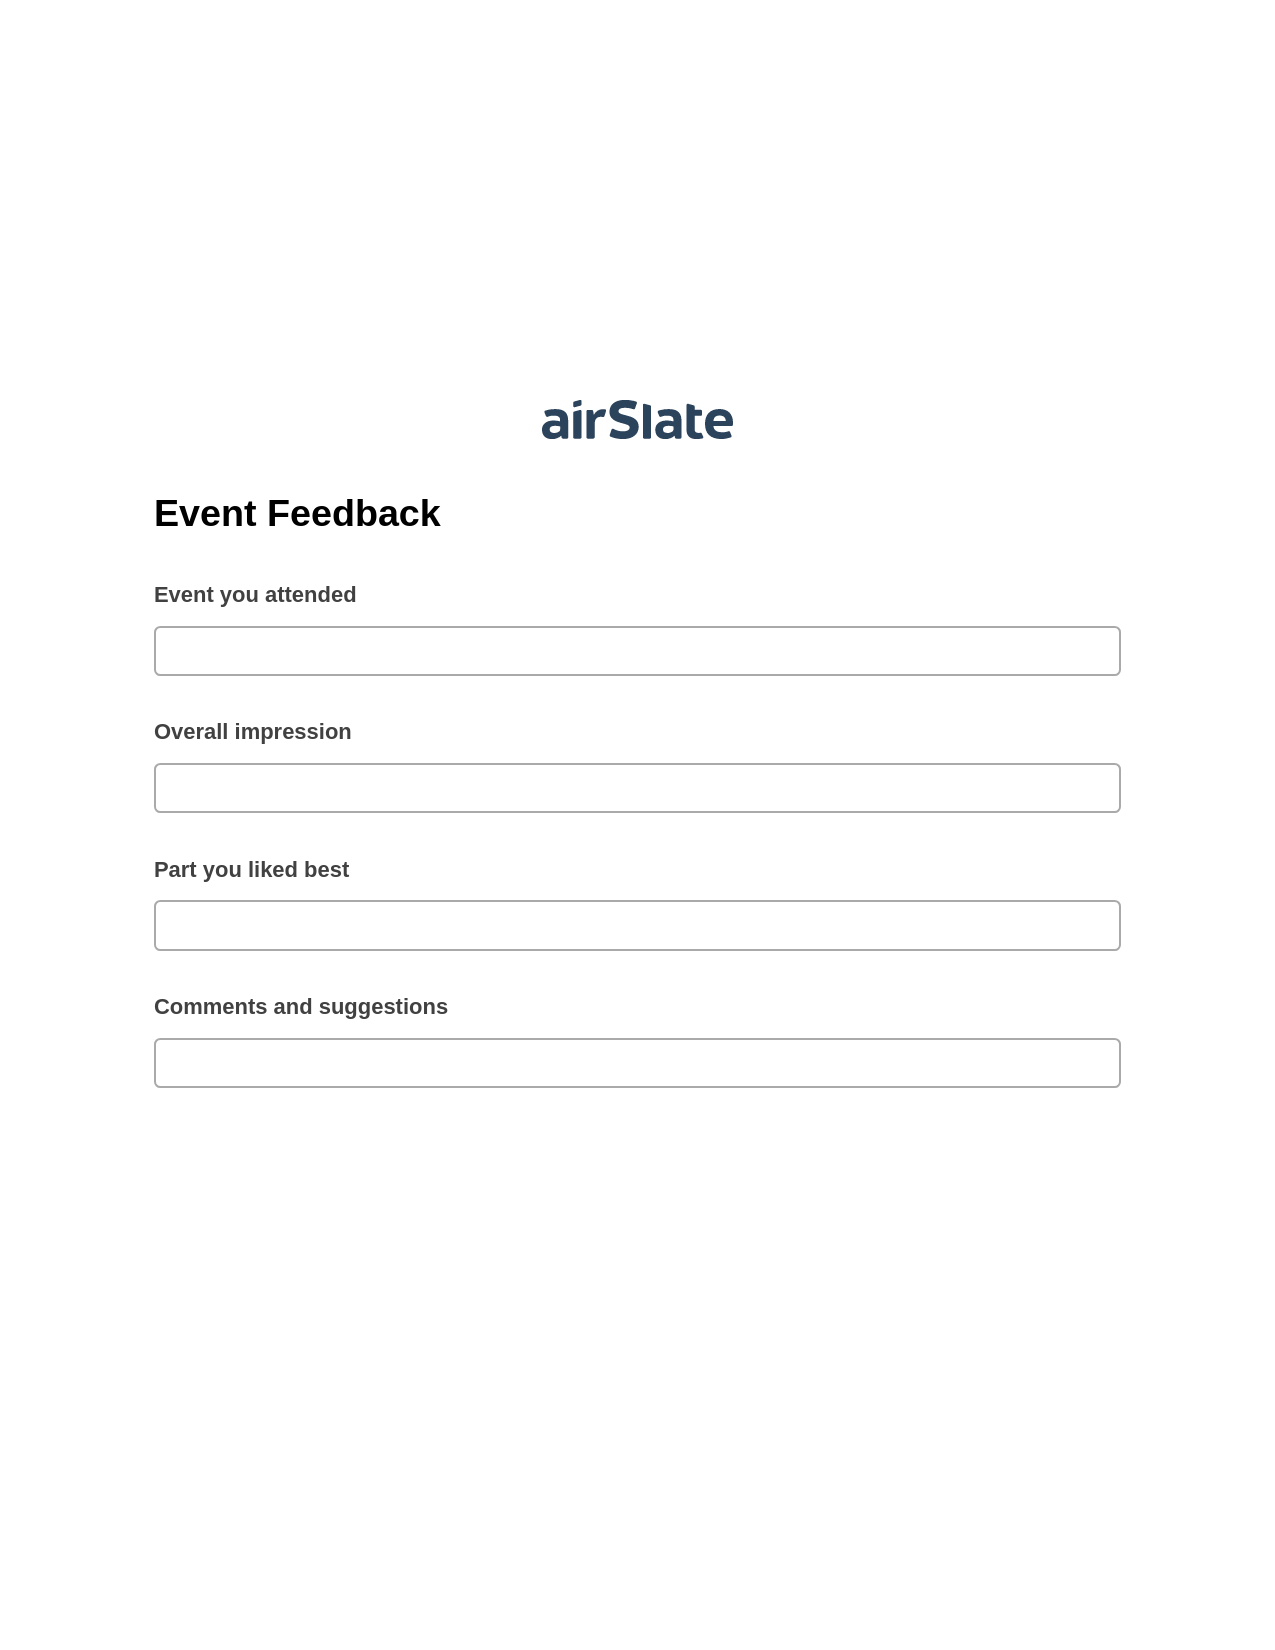 Event Feedback Pre-fill from another Slate Bot, Google Cloud Print Bot, Slack Notification Postfinish Bot